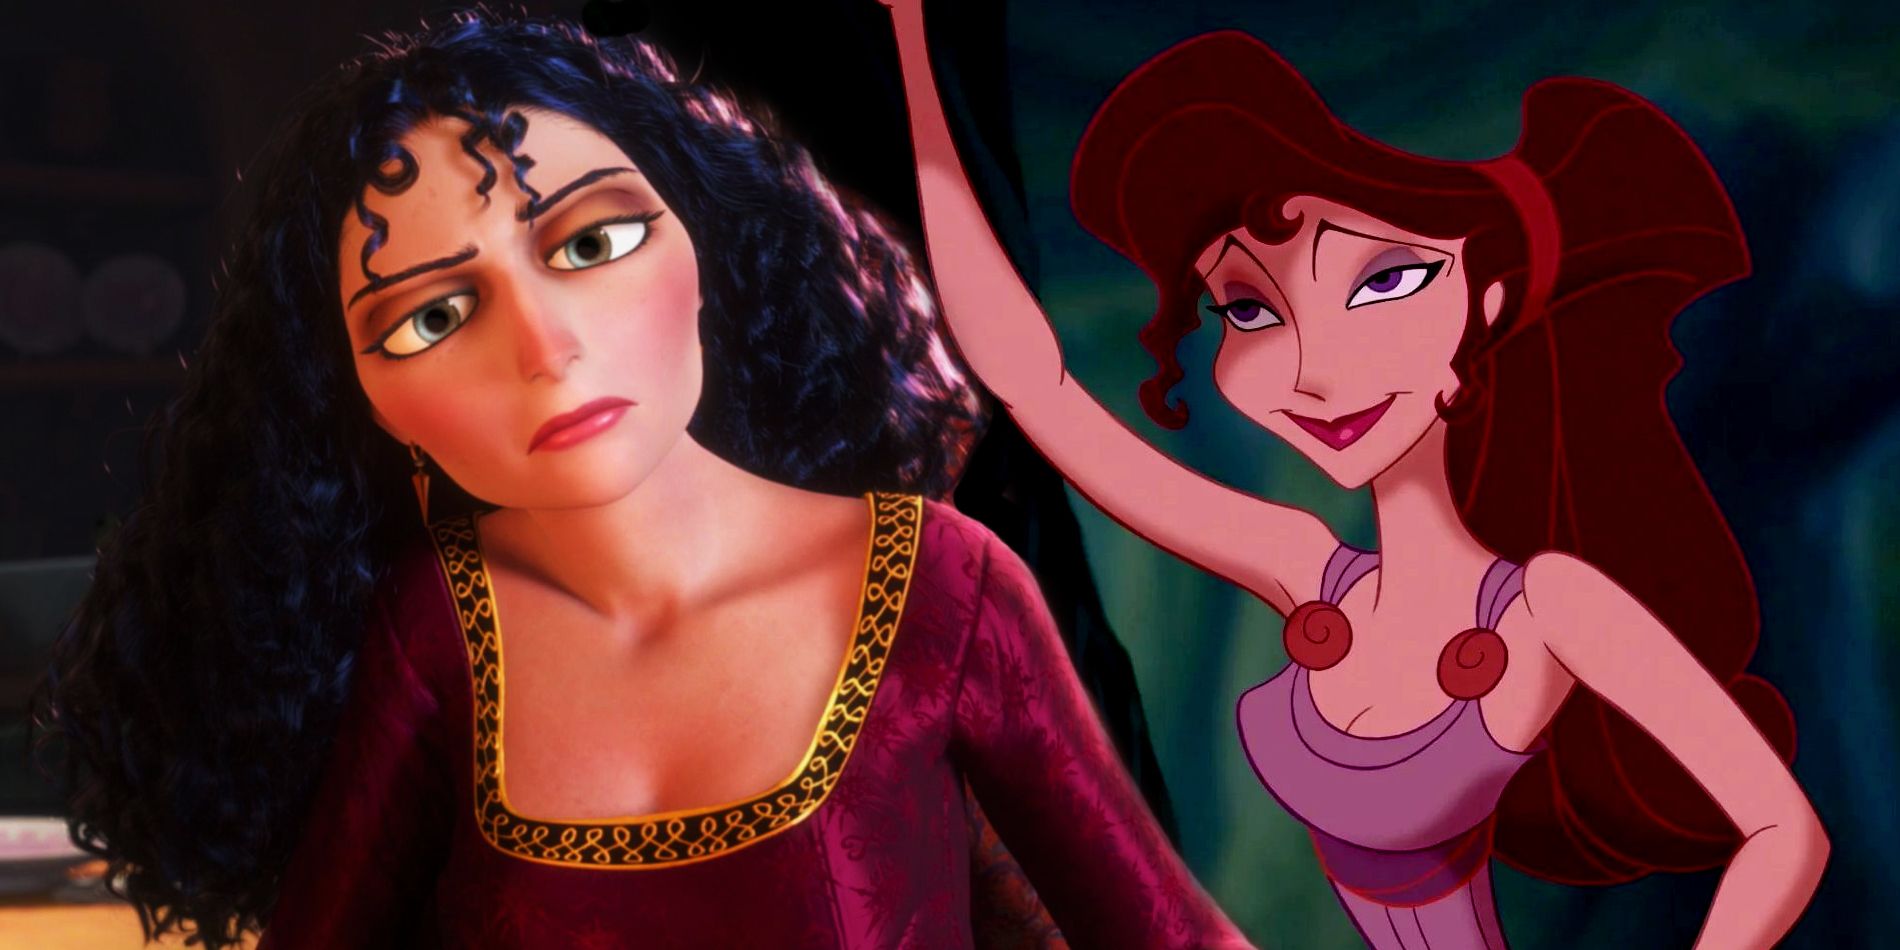 Disney Theory Completely Changes Tangled's Villain